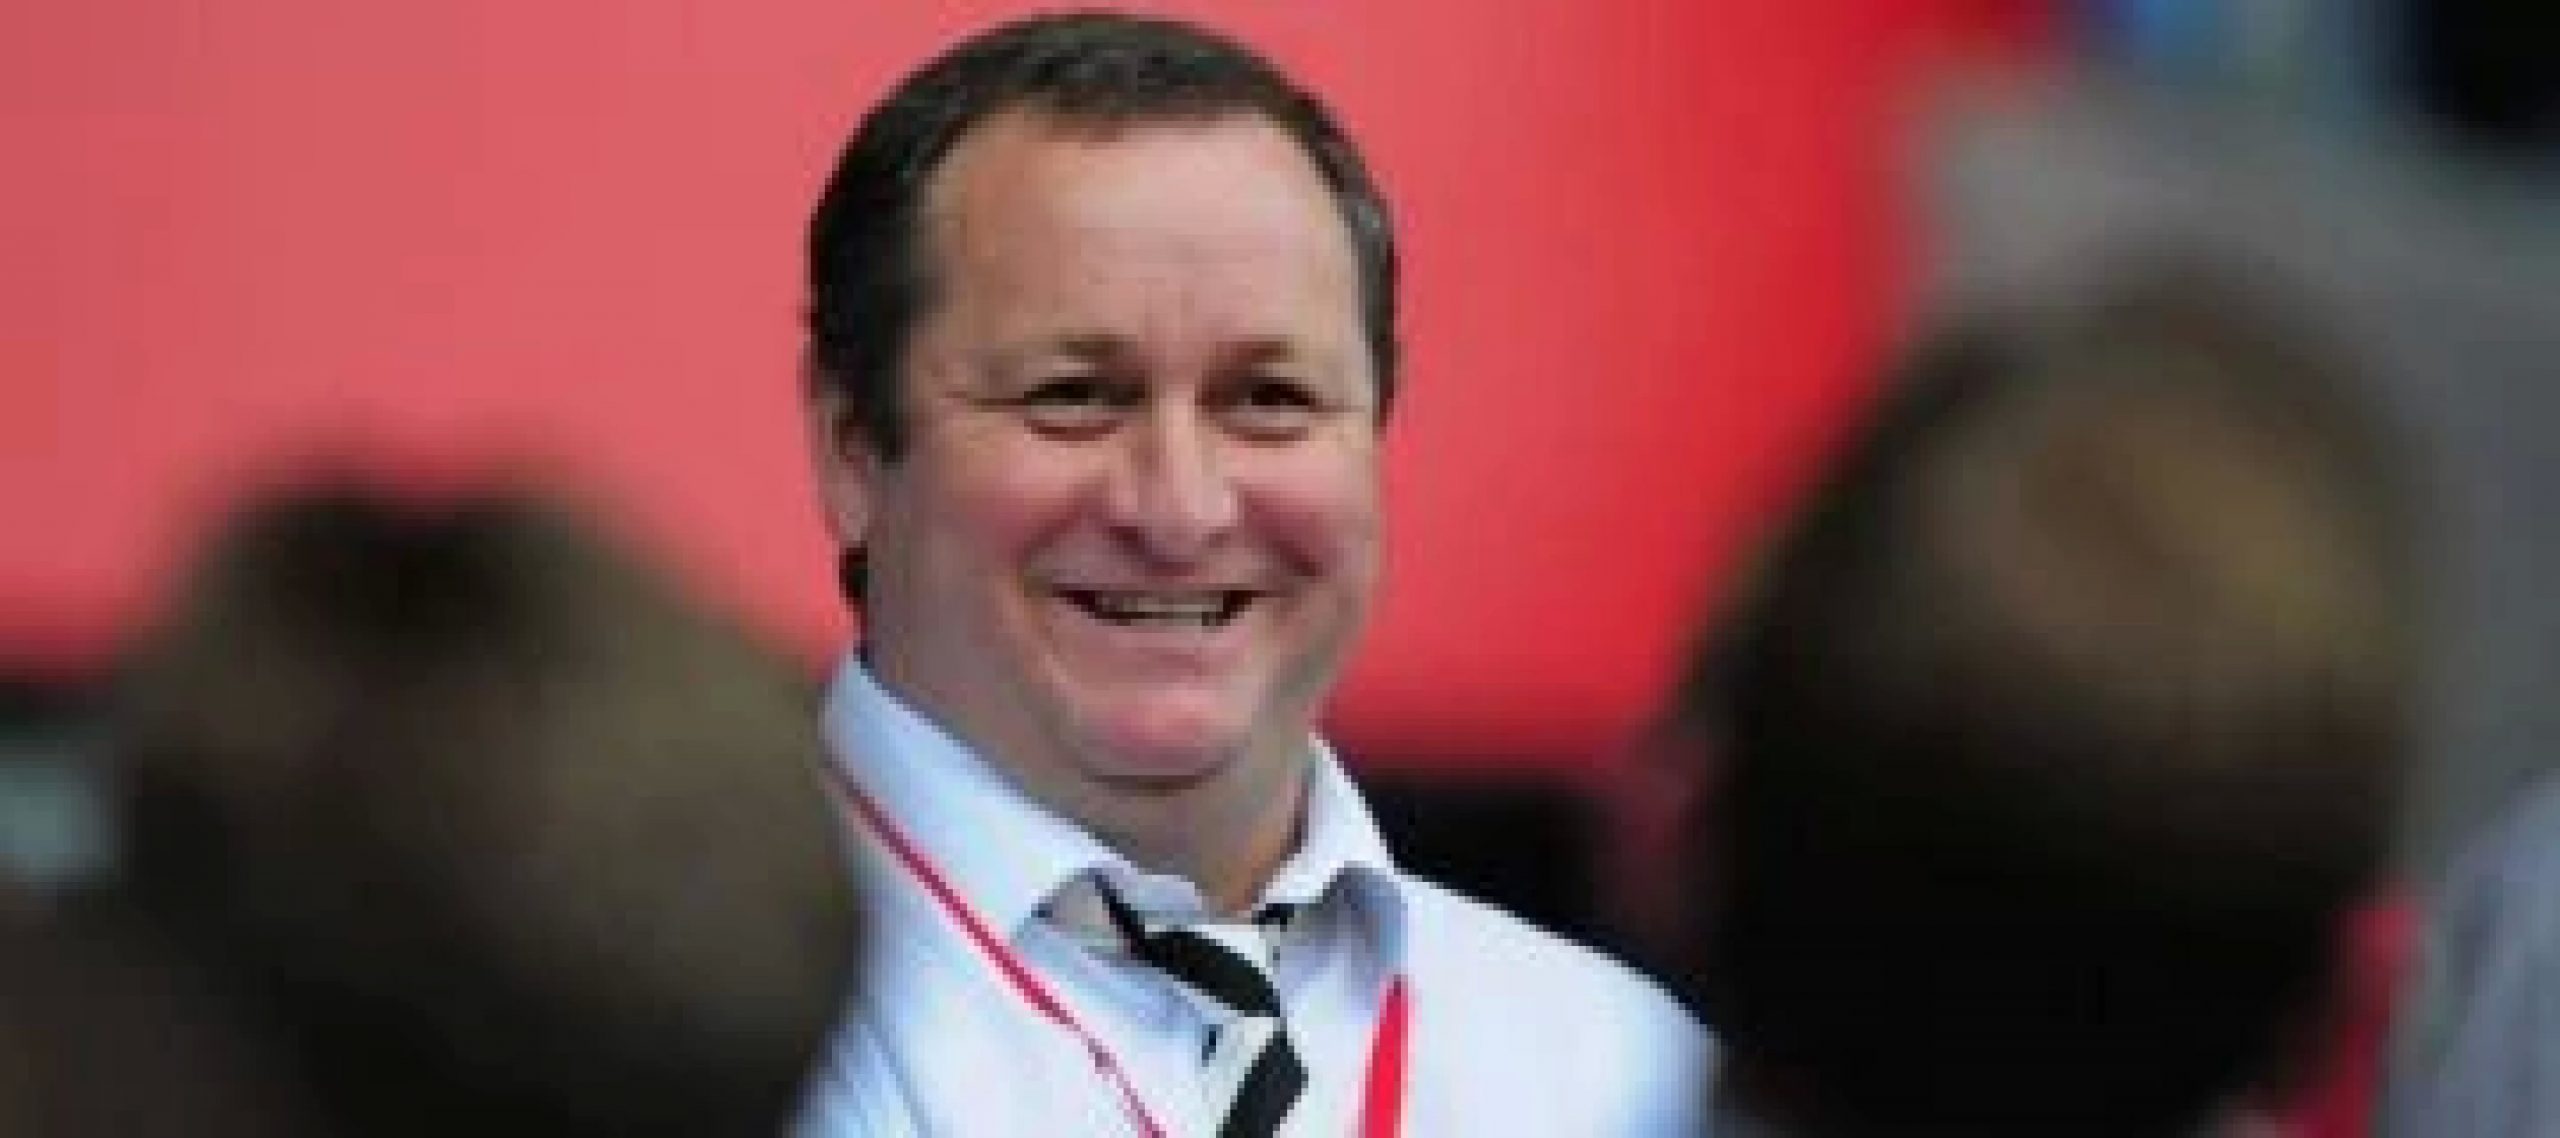 Mike Ashley ‘set to step down’ as chief exec of Frasers Group